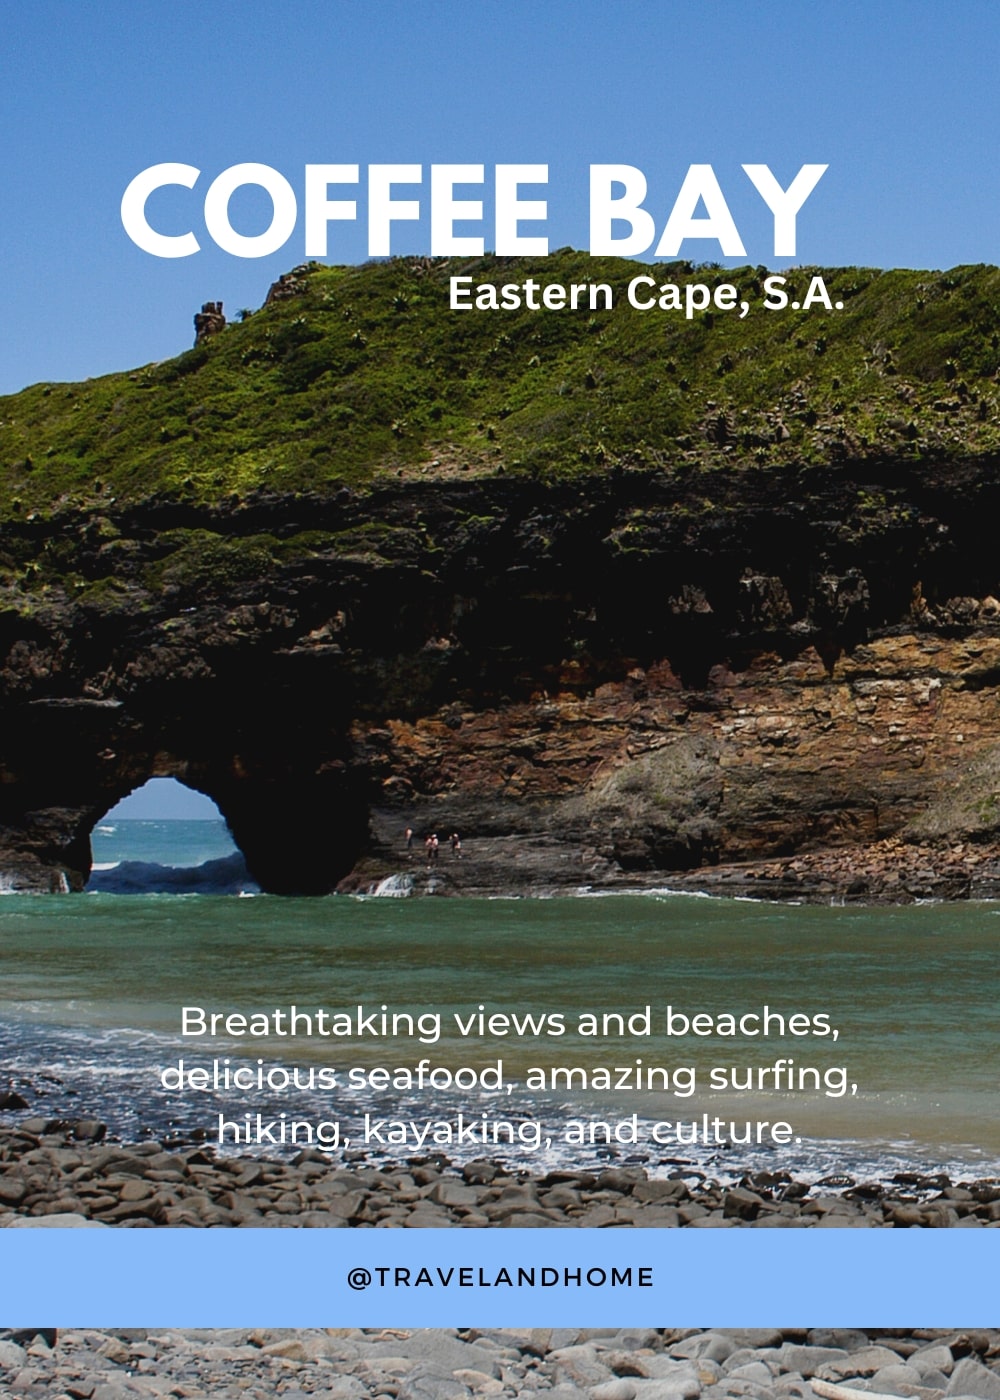 Coffee Bay The Wild Coasts Most Popular Holiday Destination travel and home travelandhome